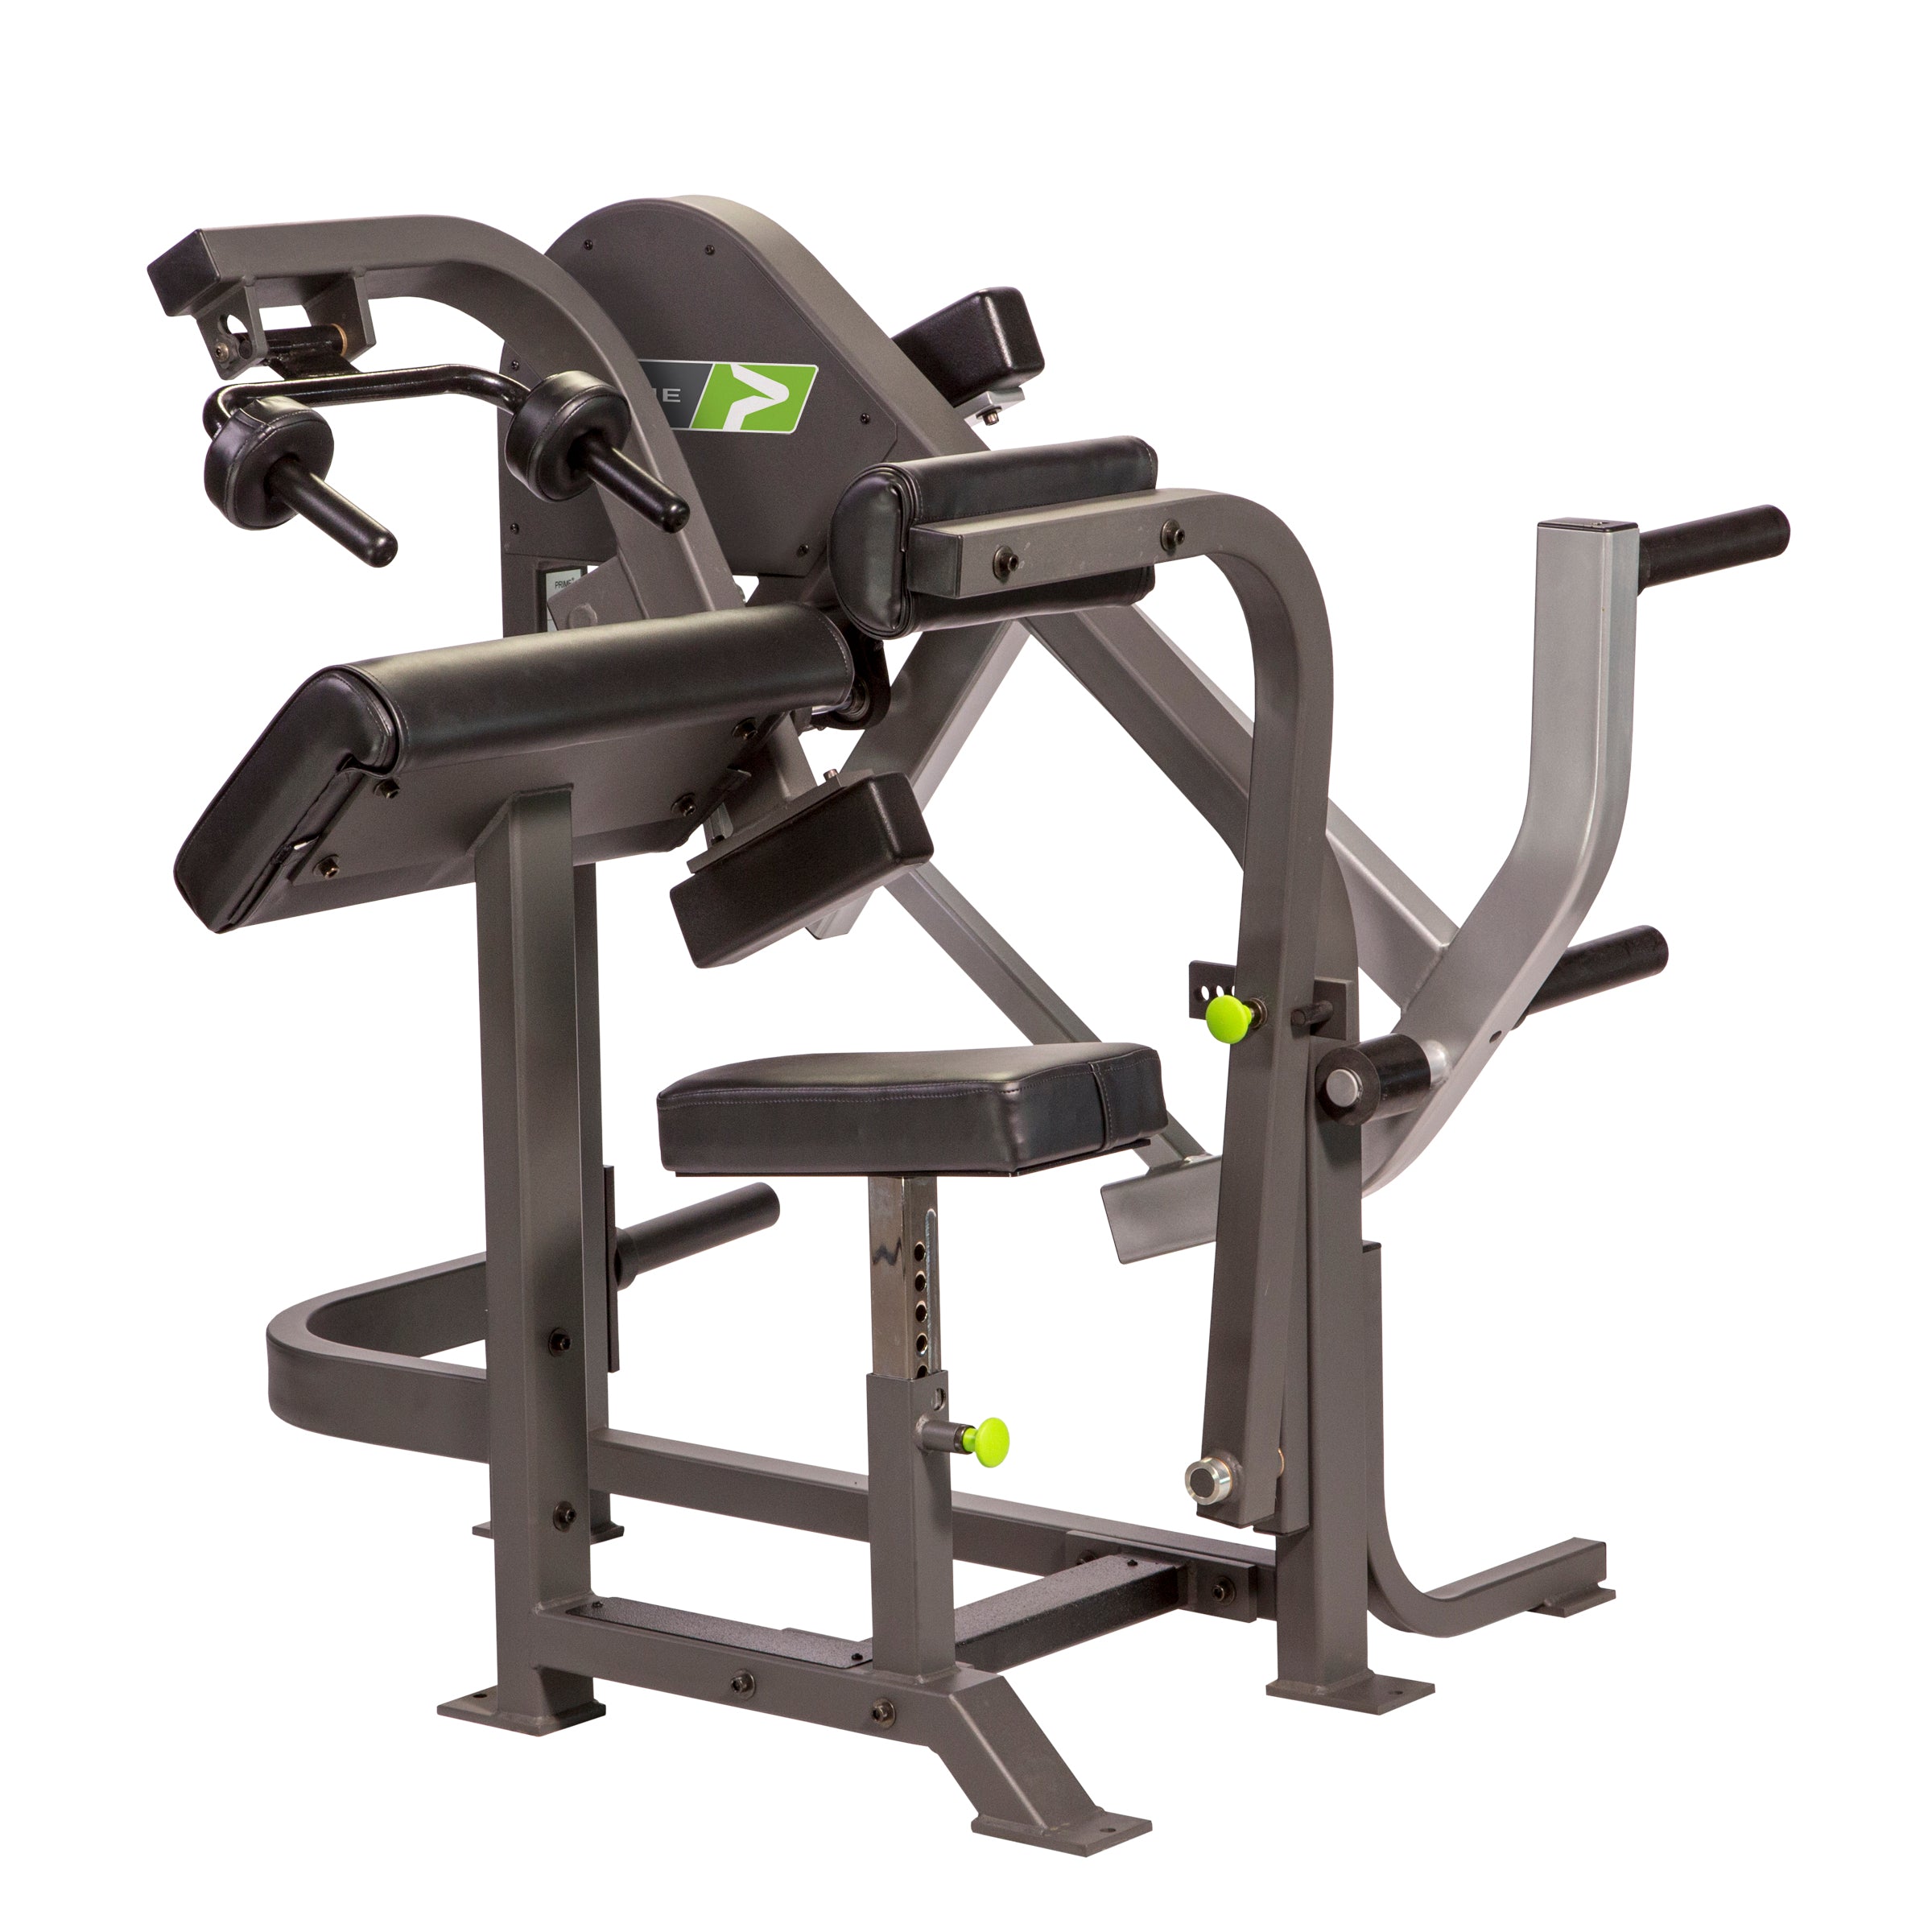 PLATE LOADED Tricep Extension PRIME Fitness USA